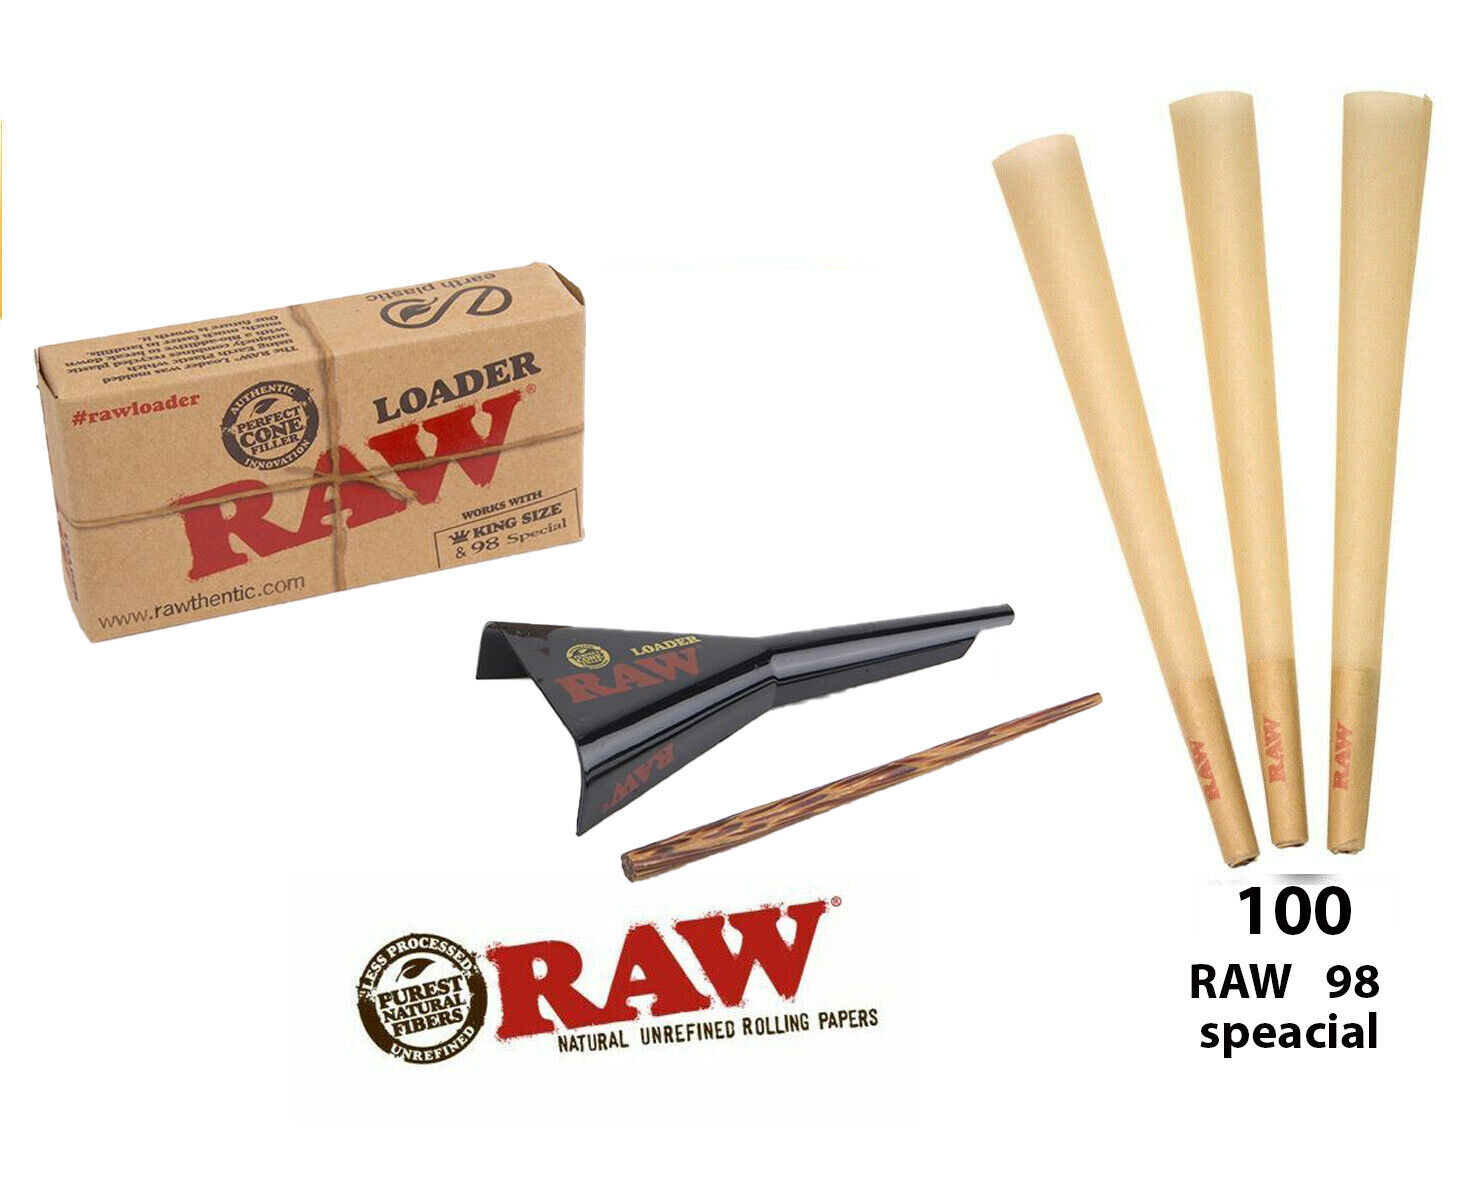 RAW classic 98 special Size Pre-Rolled Cones (100 Pack)+RAW 98 size cone loader